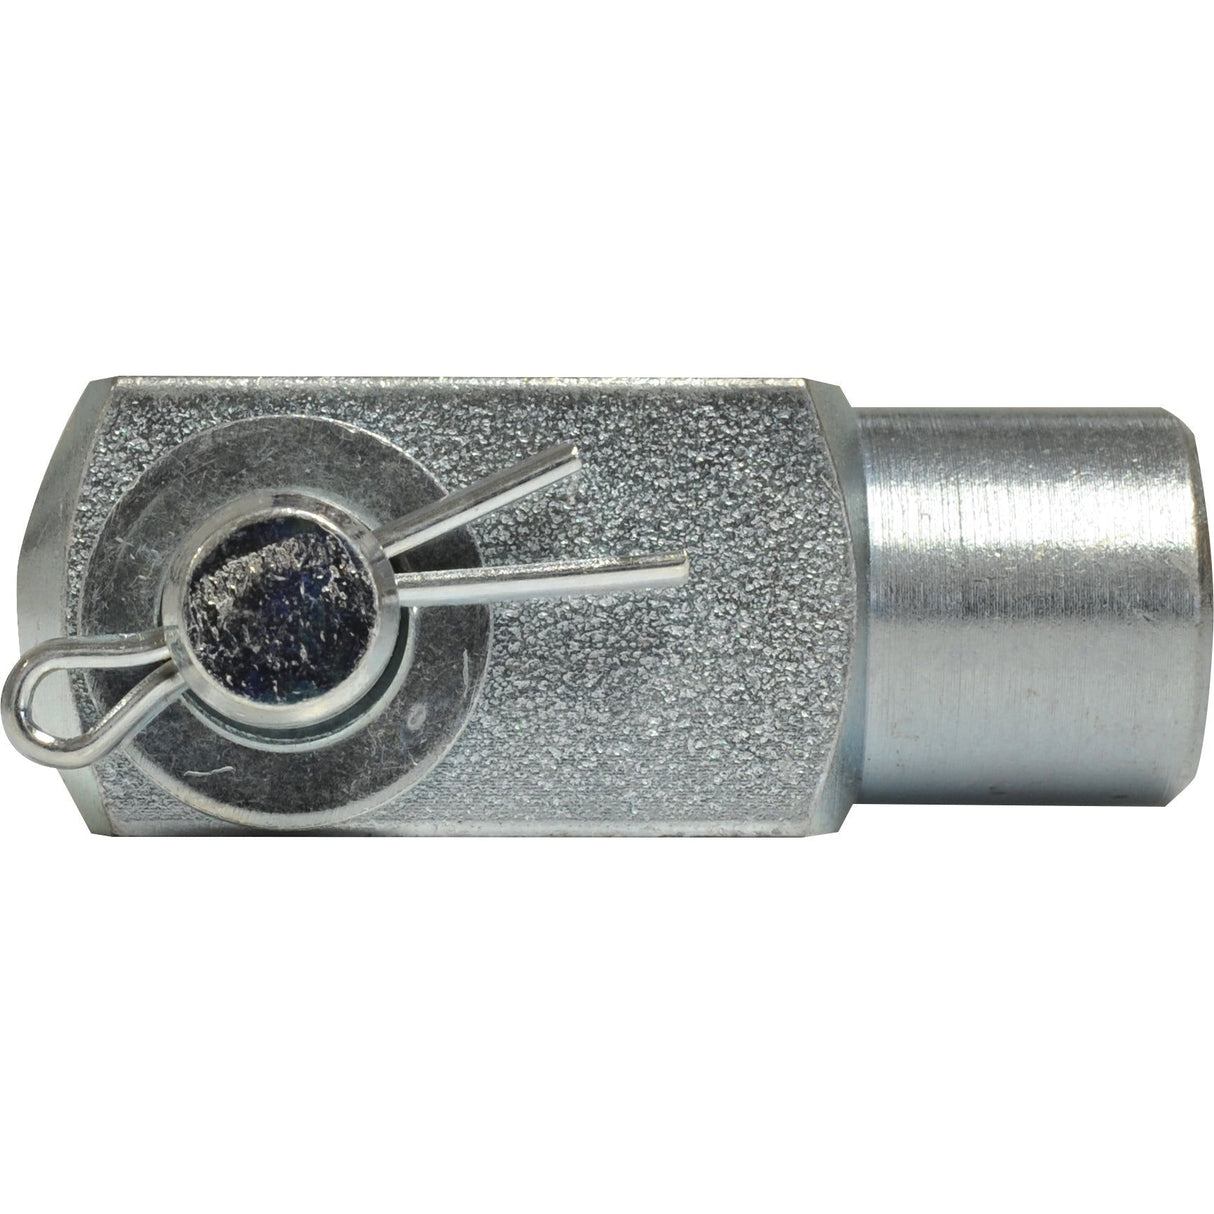 Metric Clevis End with Pin M16 (71751)
 - S.51311 - Farming Parts